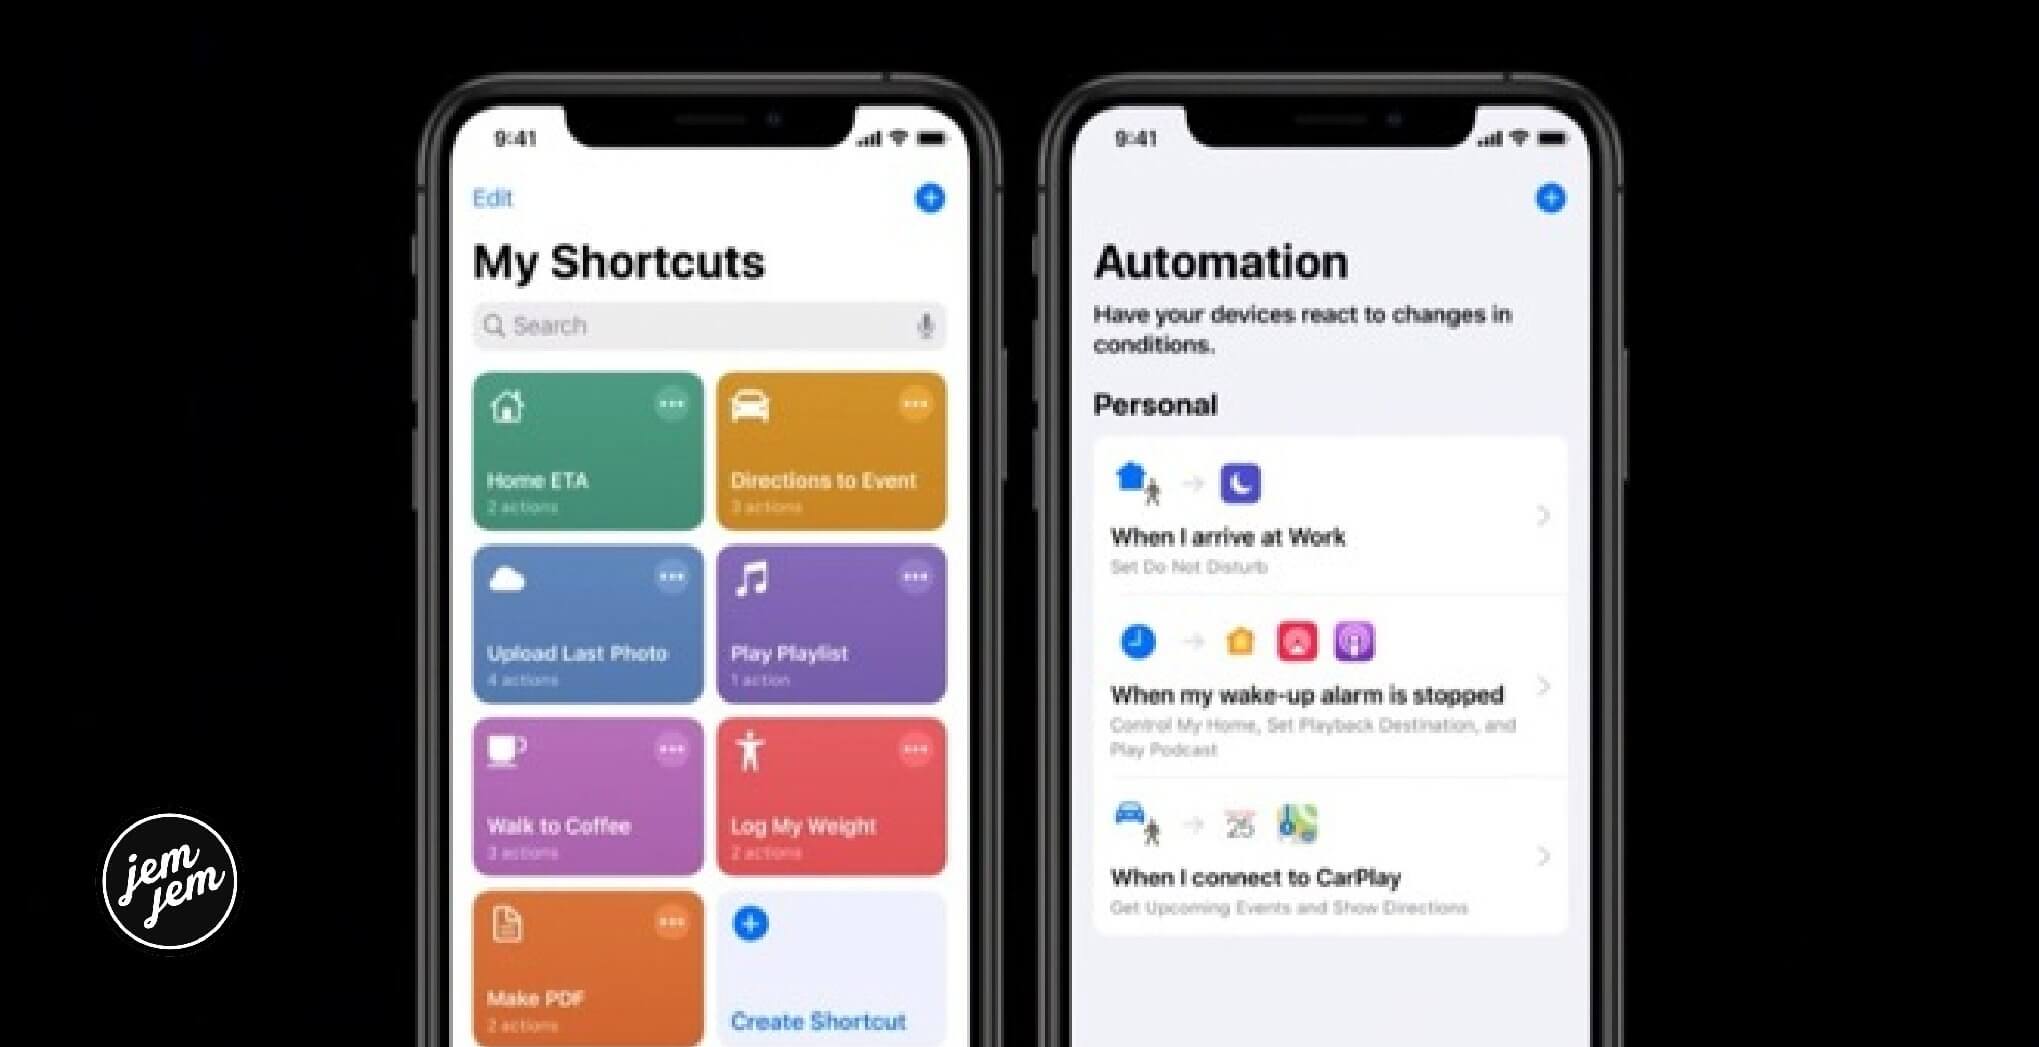 My favorite new automations in Shortcuts in iOS 14